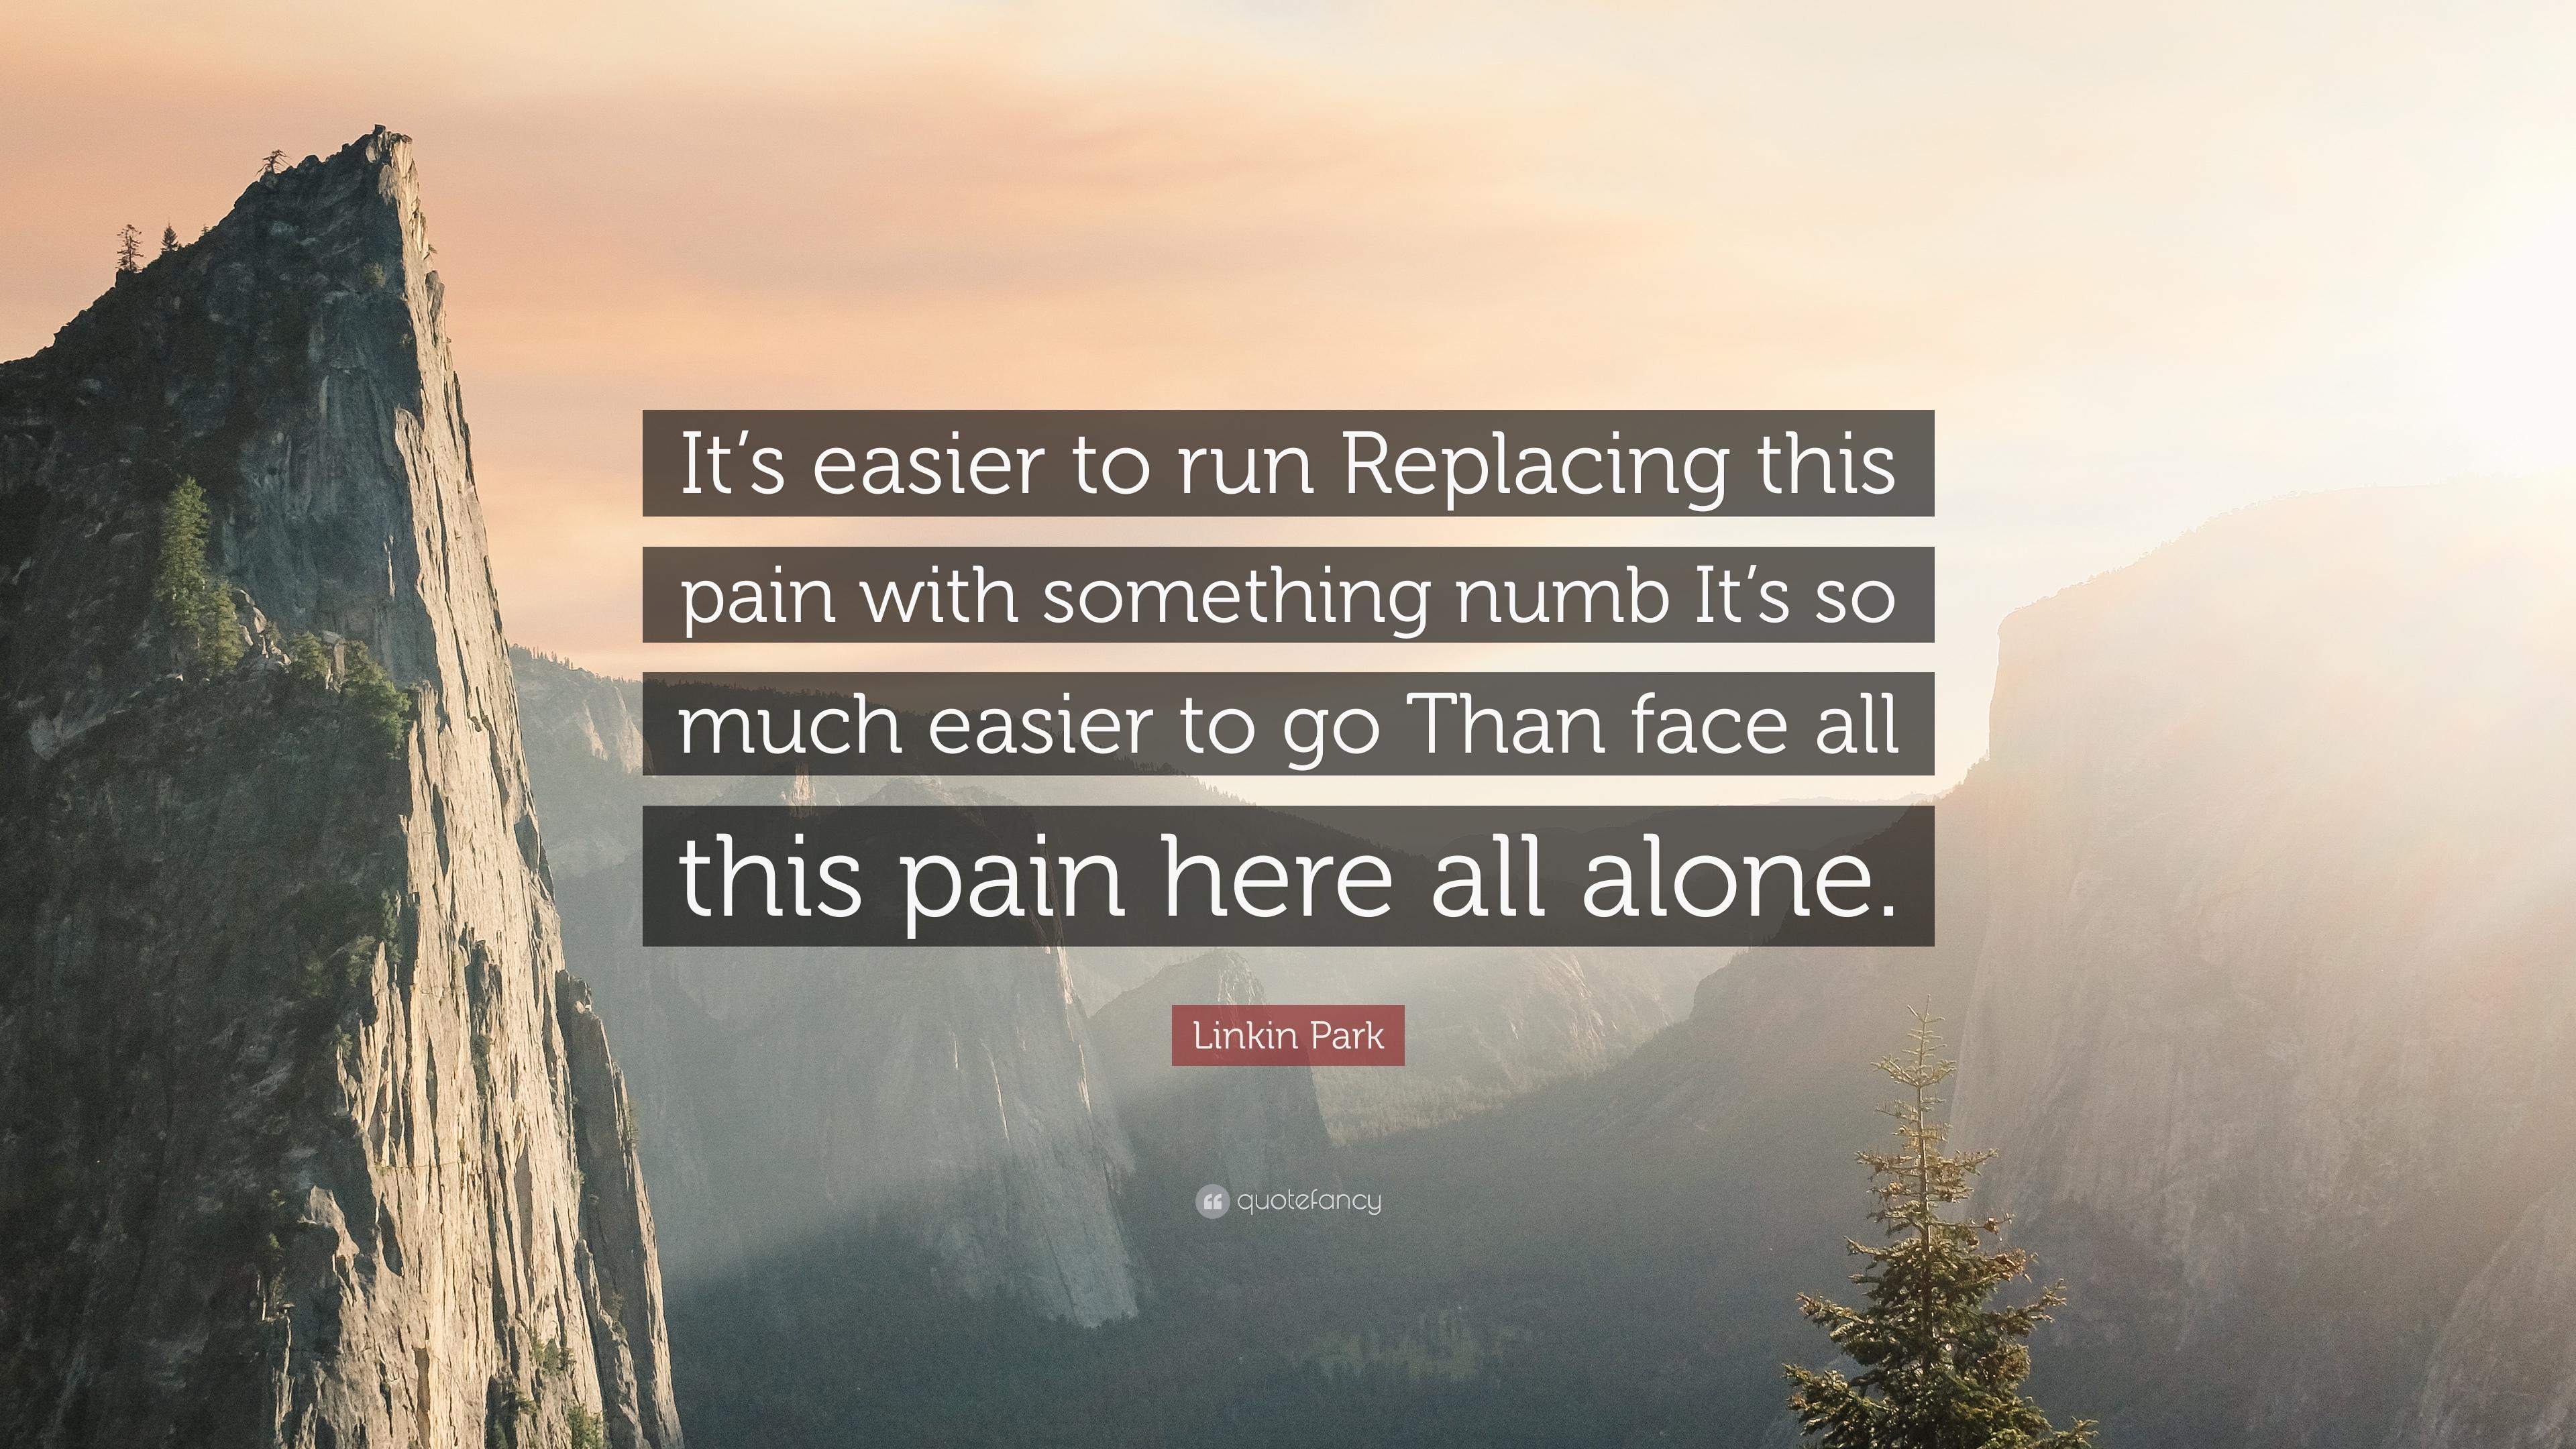 Linkin Park Quote: “It's easier to run Replacing this pain